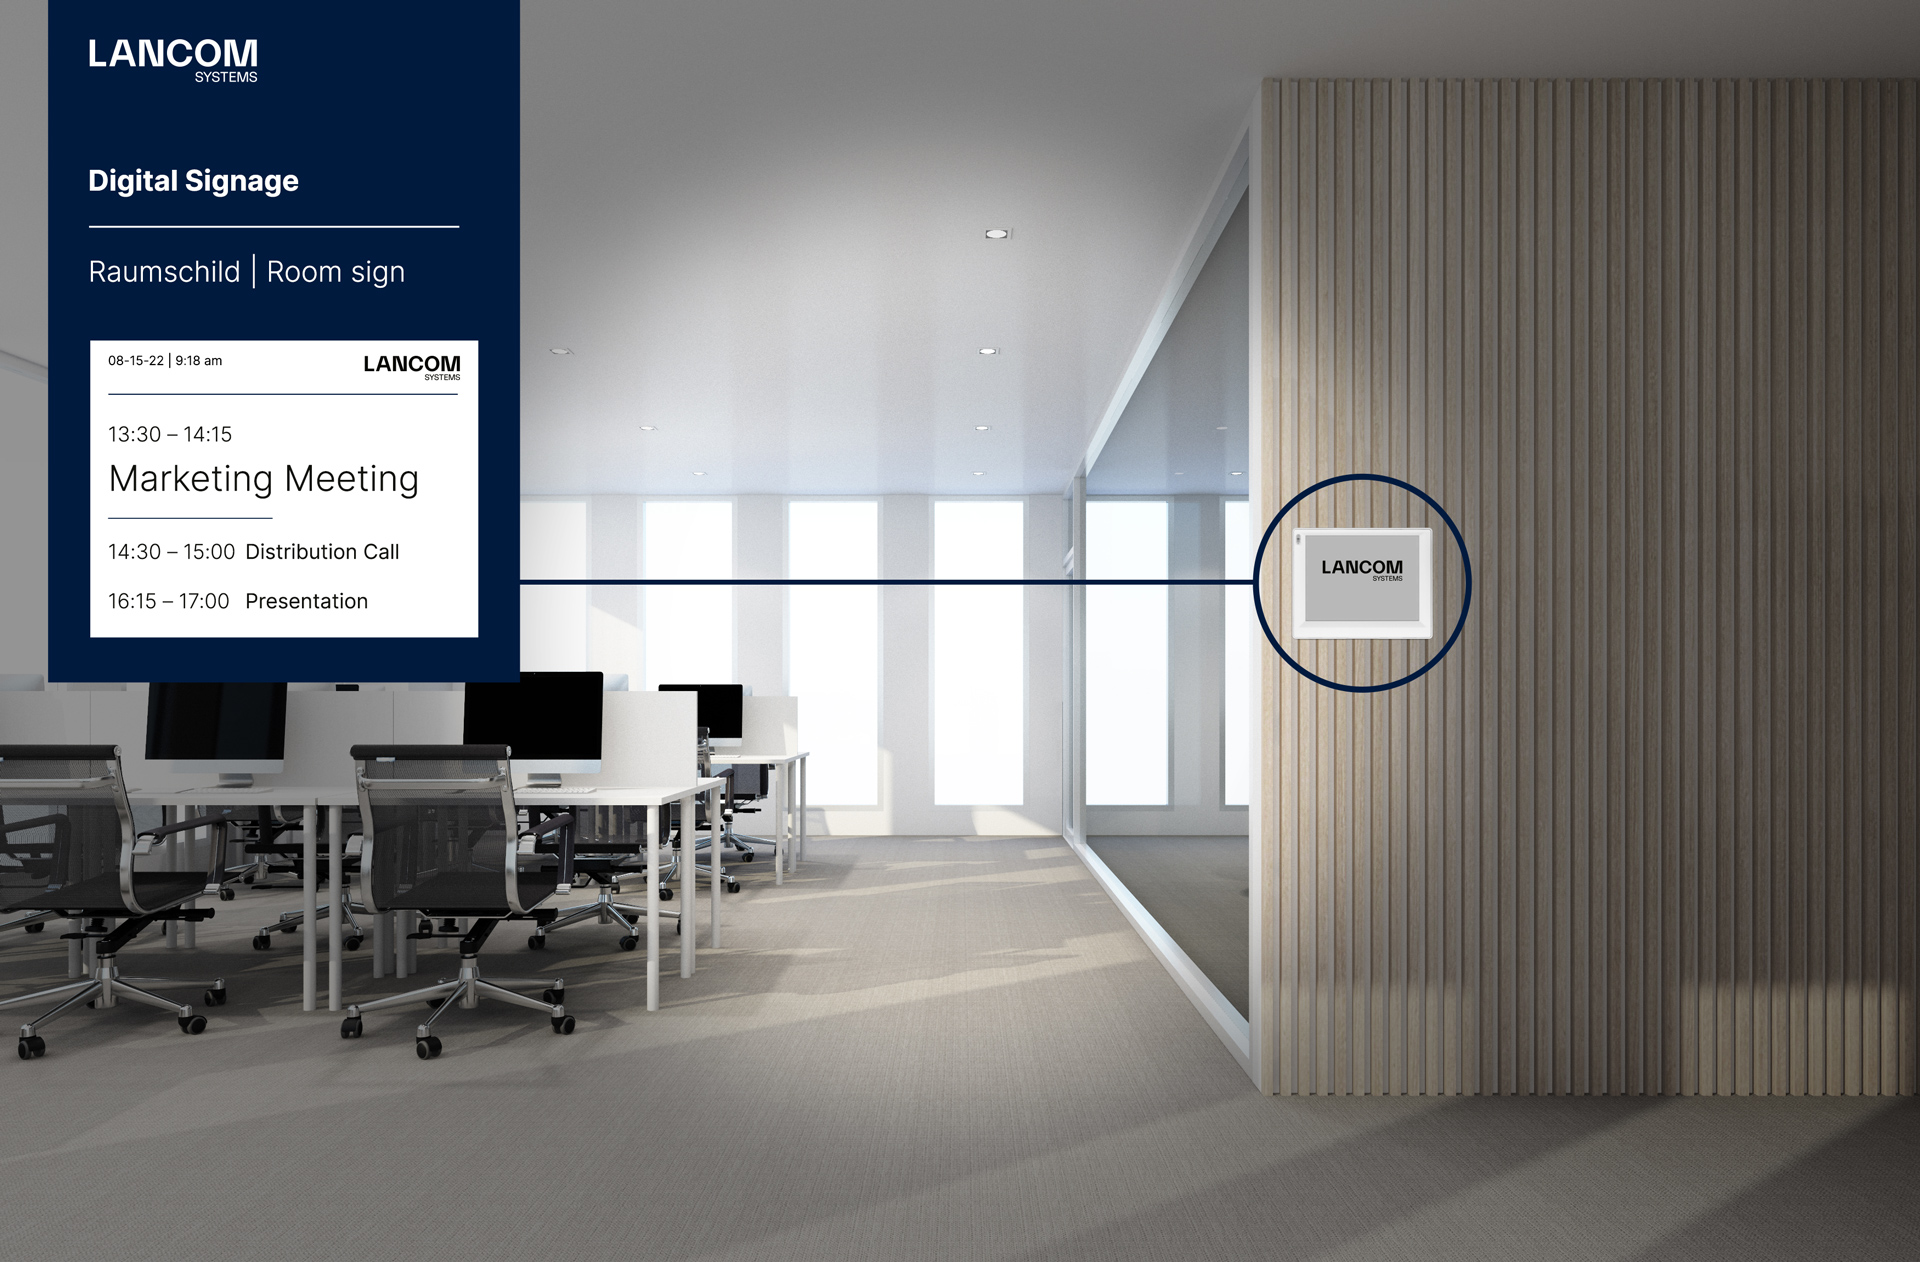 Modern meeting room with digital door sign including information on meeting duration, purpose and follow-up meetings